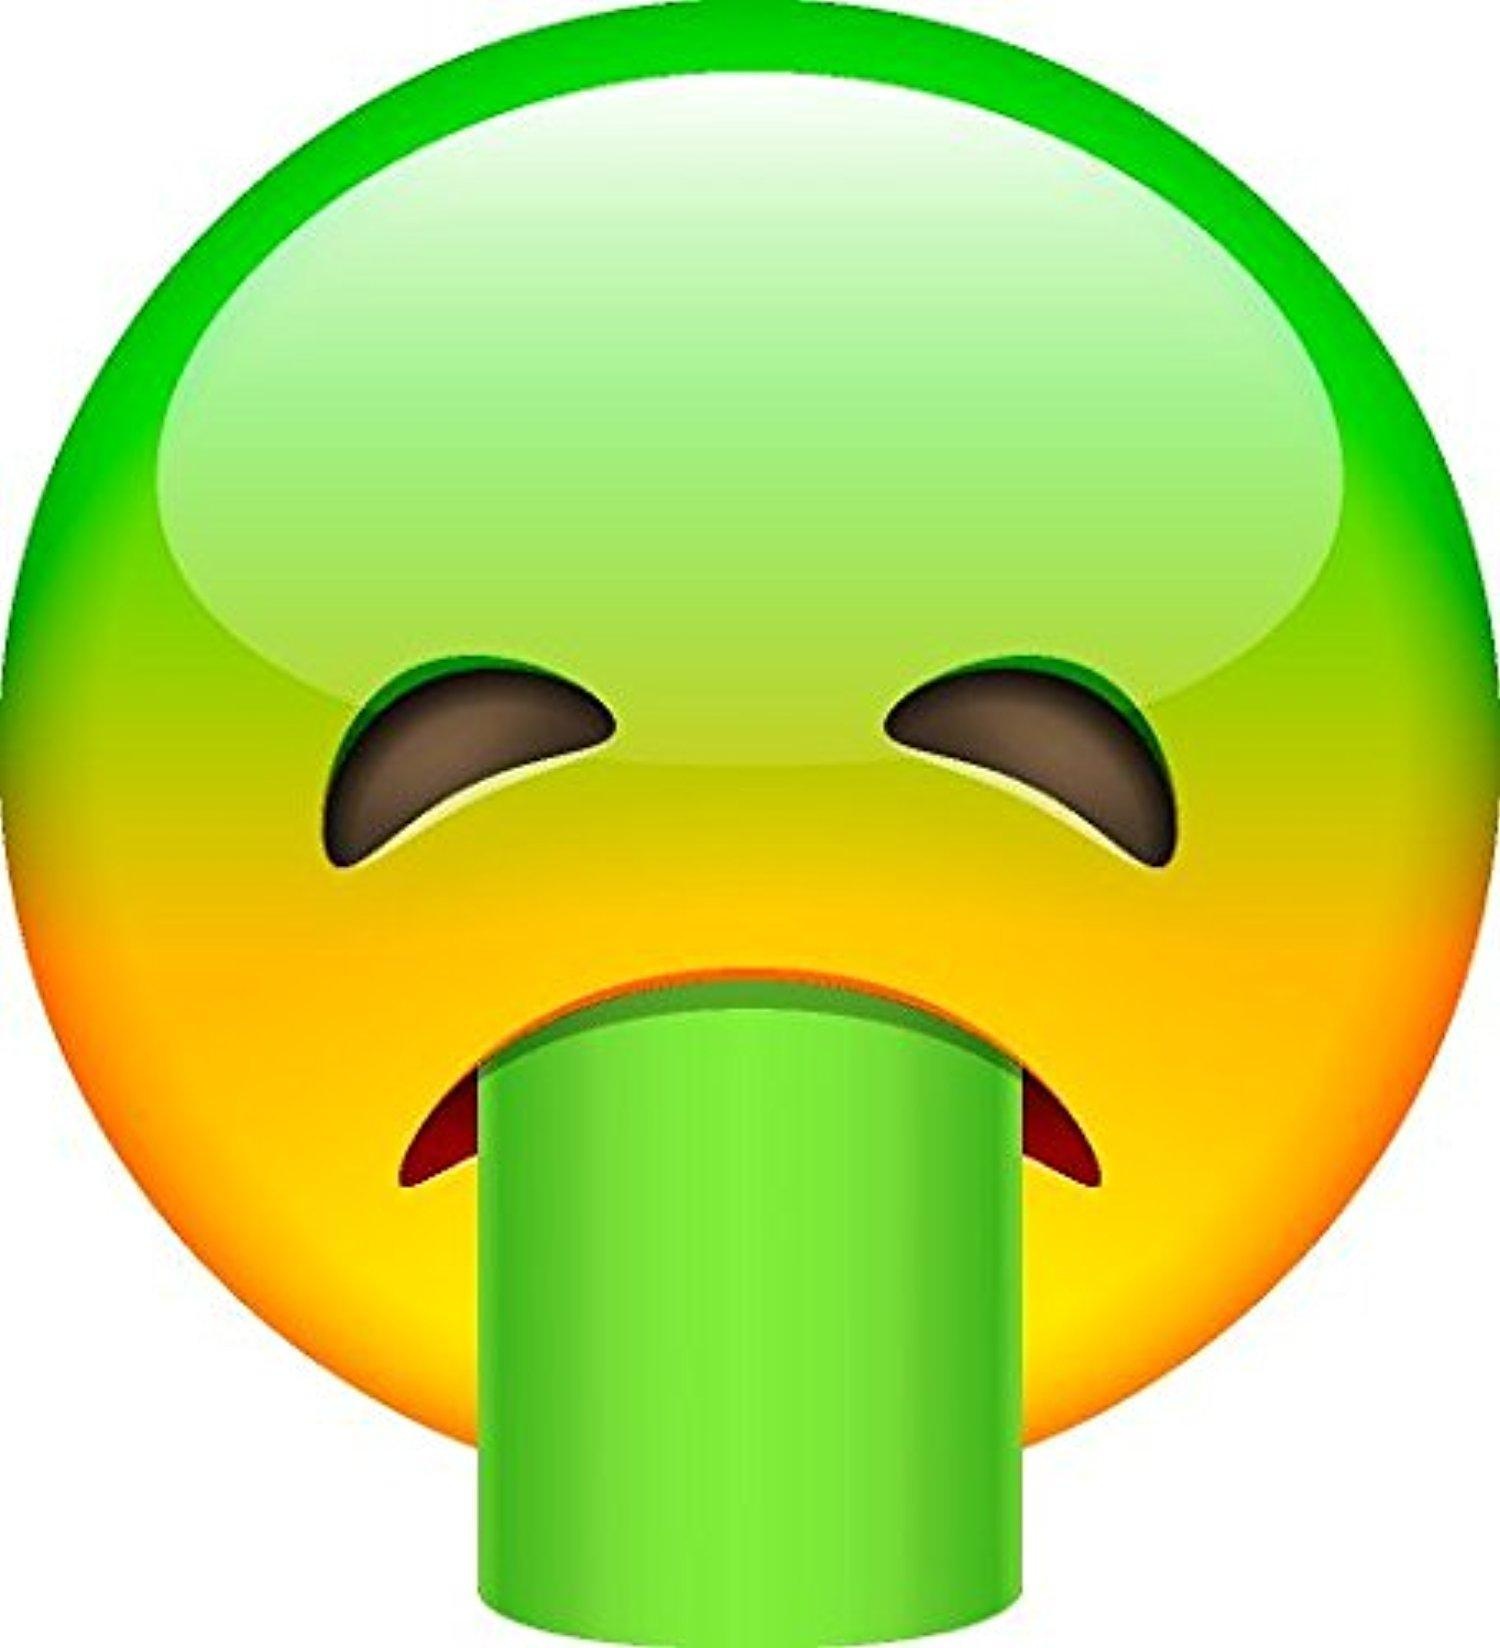 Smiley Face Emoji - Green Sick - Latest & Top Rated